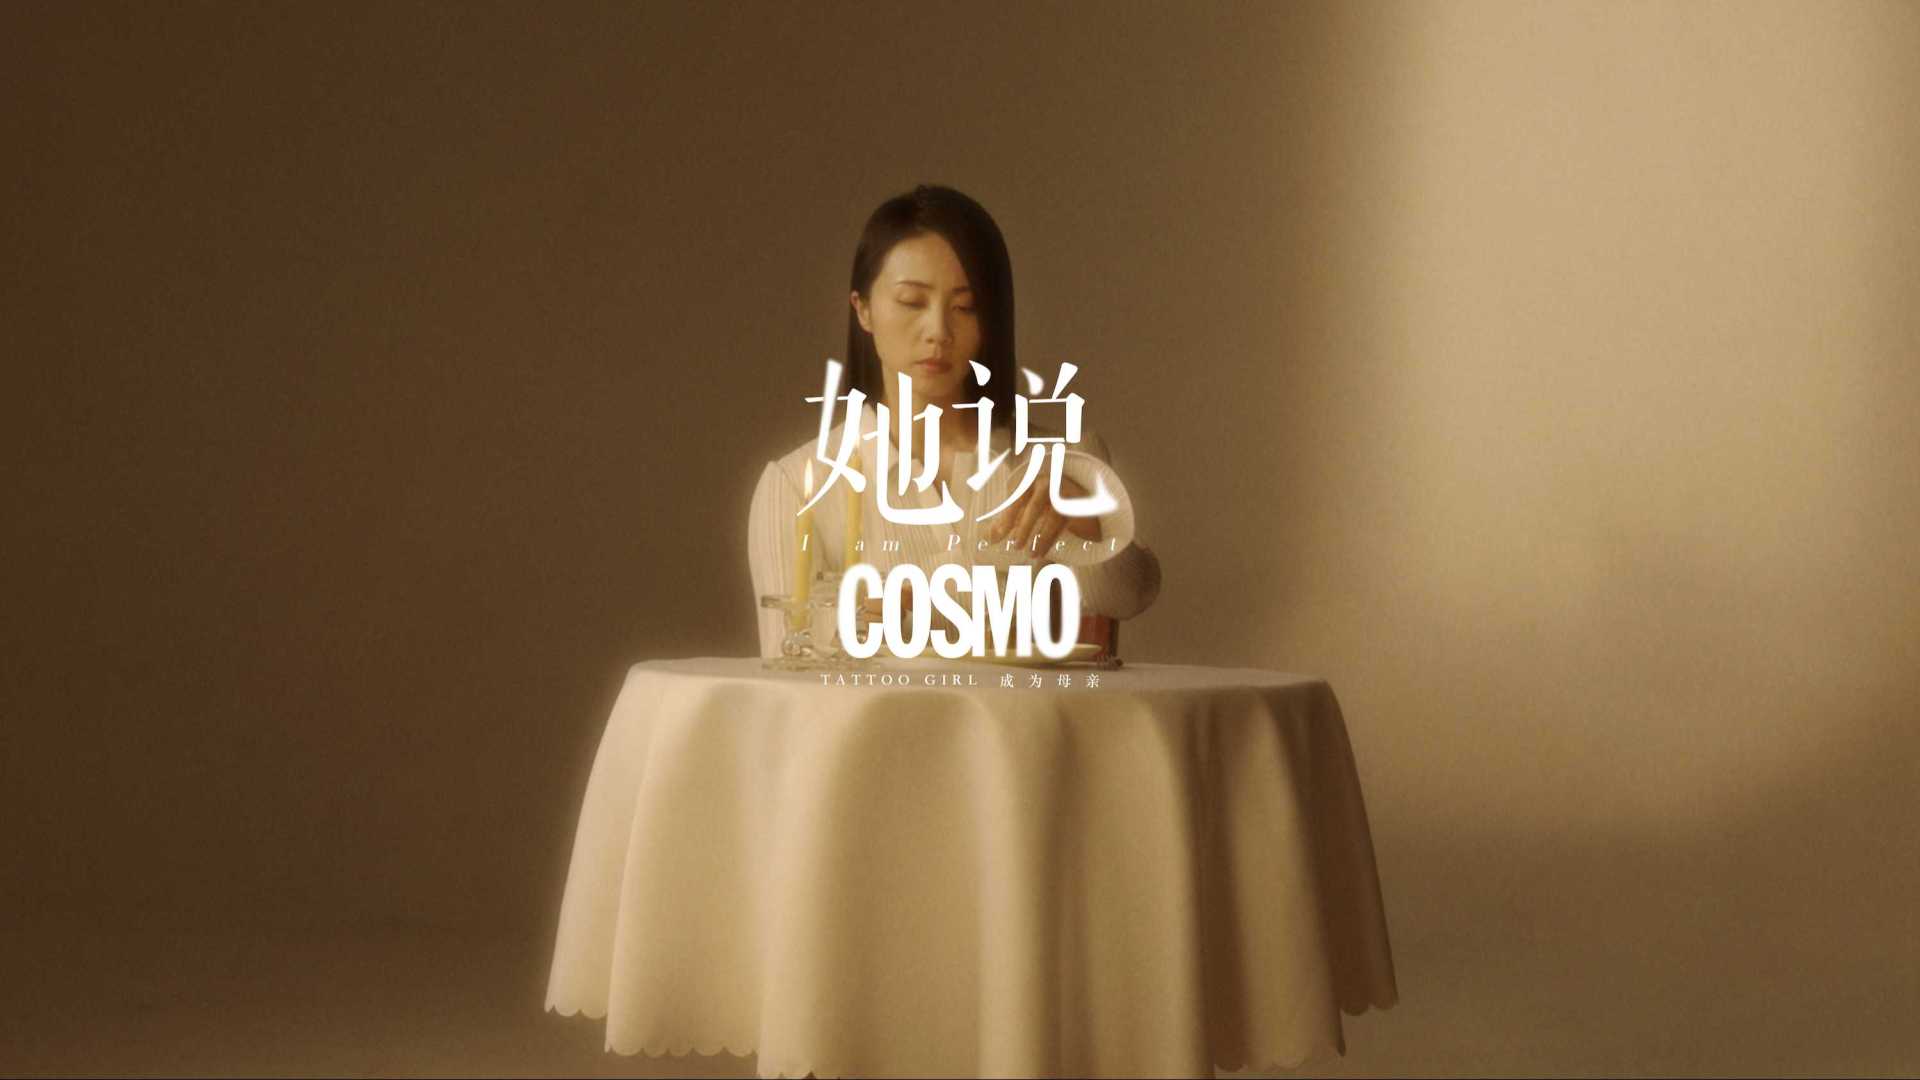 COSMO x 孙莉 _ < 她说 >